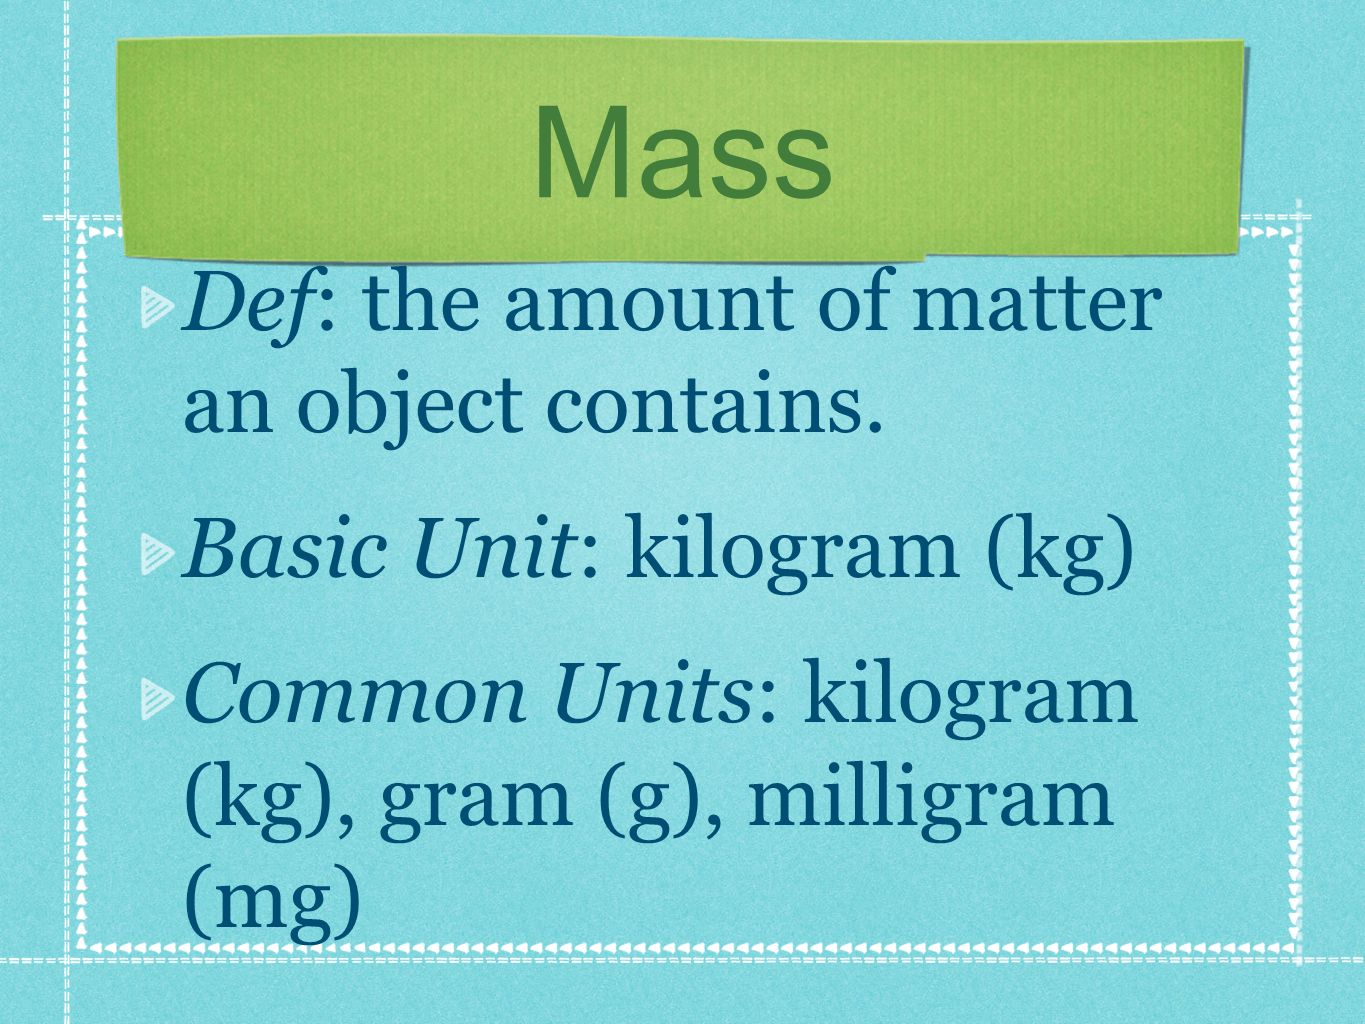 Mass Def: the amount of matter an object contains.